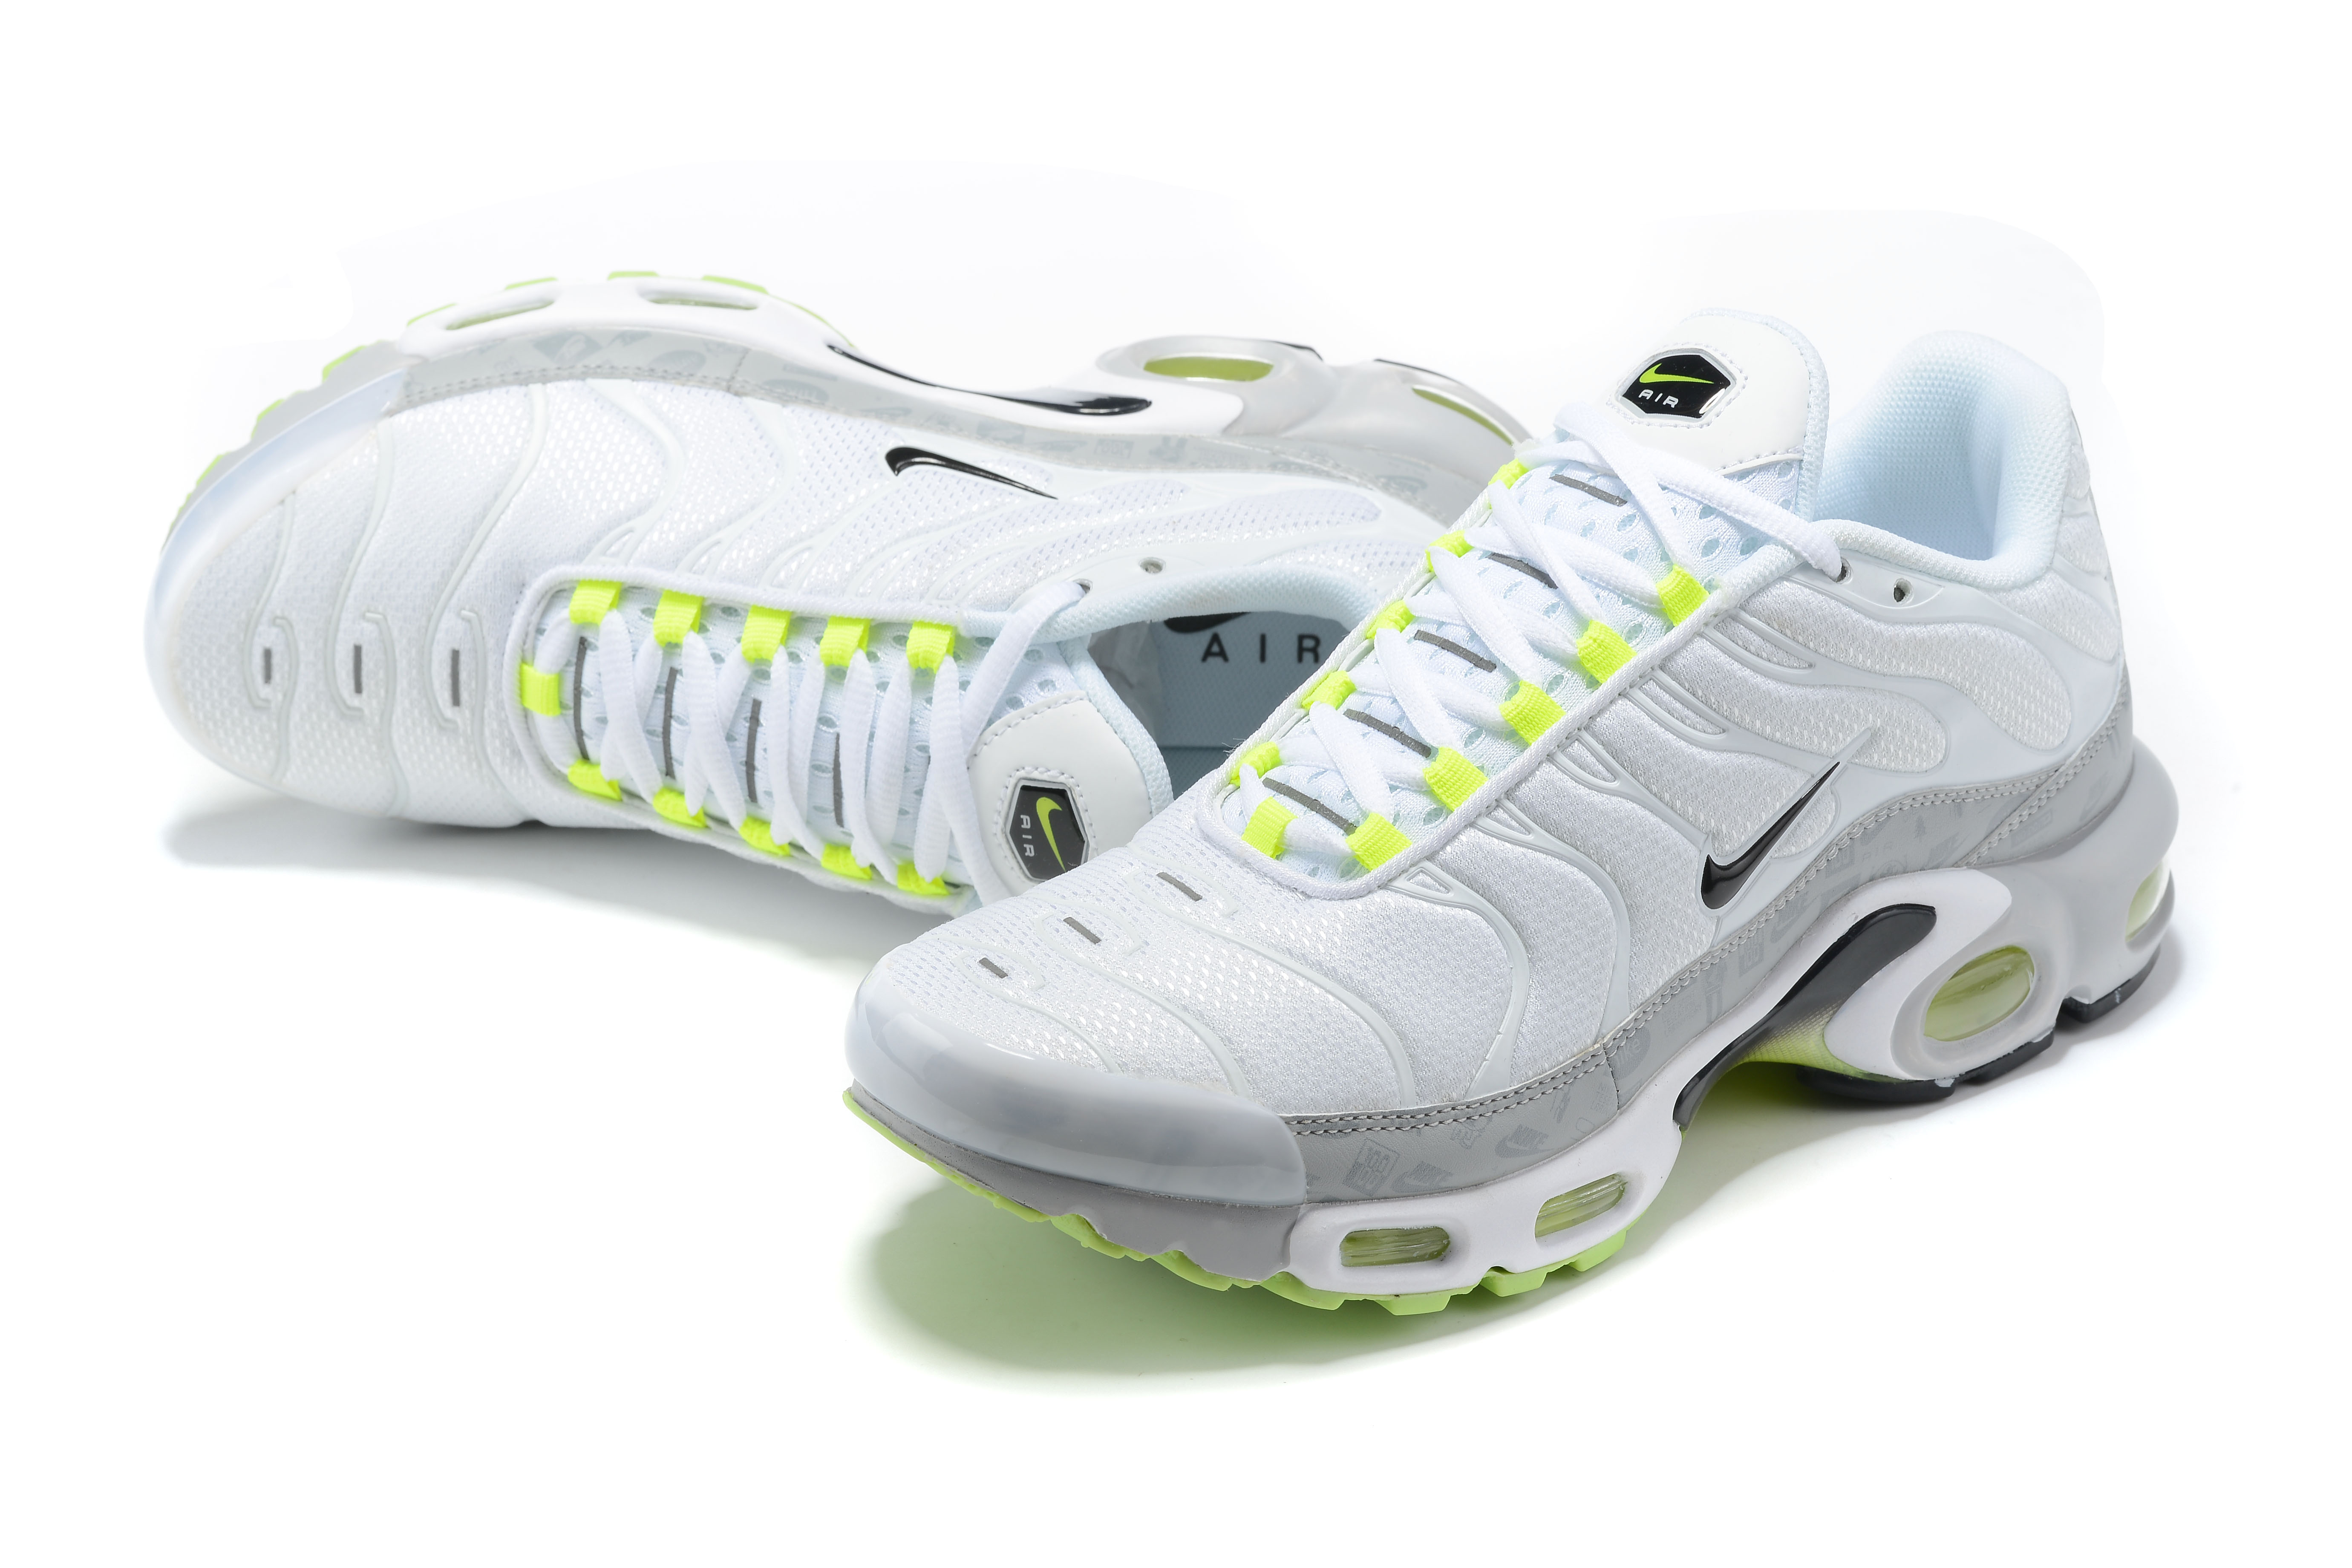 New Nike Air Max Plus White Fluorscent Grey Shoes - Click Image to Close